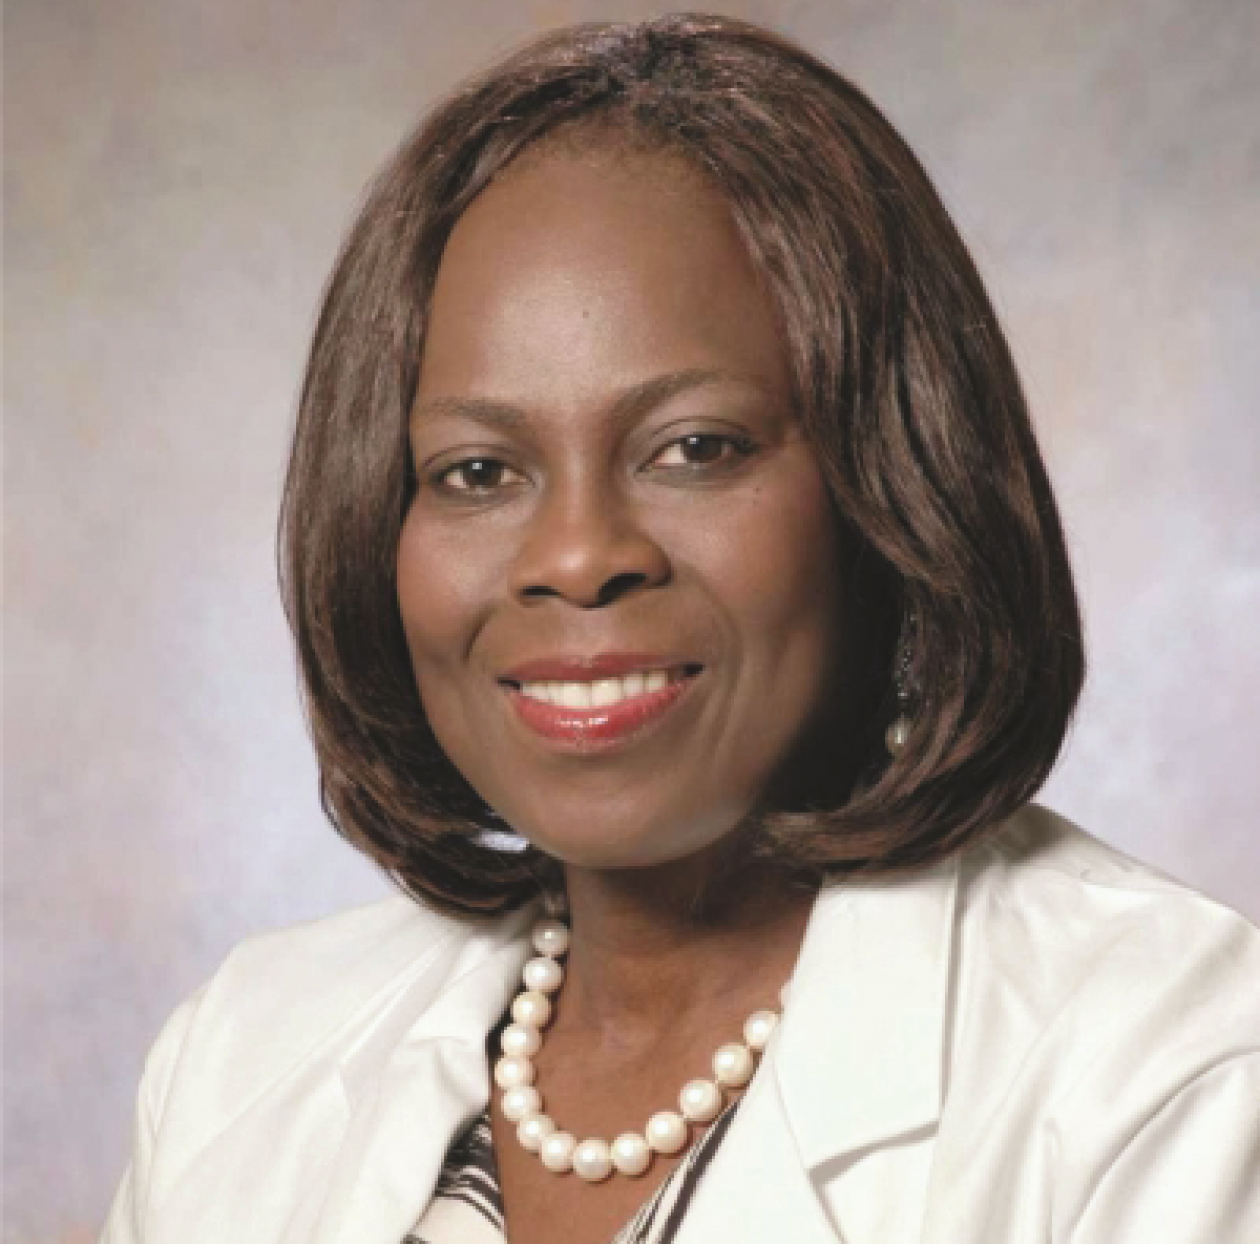 Dr. Olopade headshot. She is smiling, facing forward, wearing a white jacket, with a white pearl necklace.